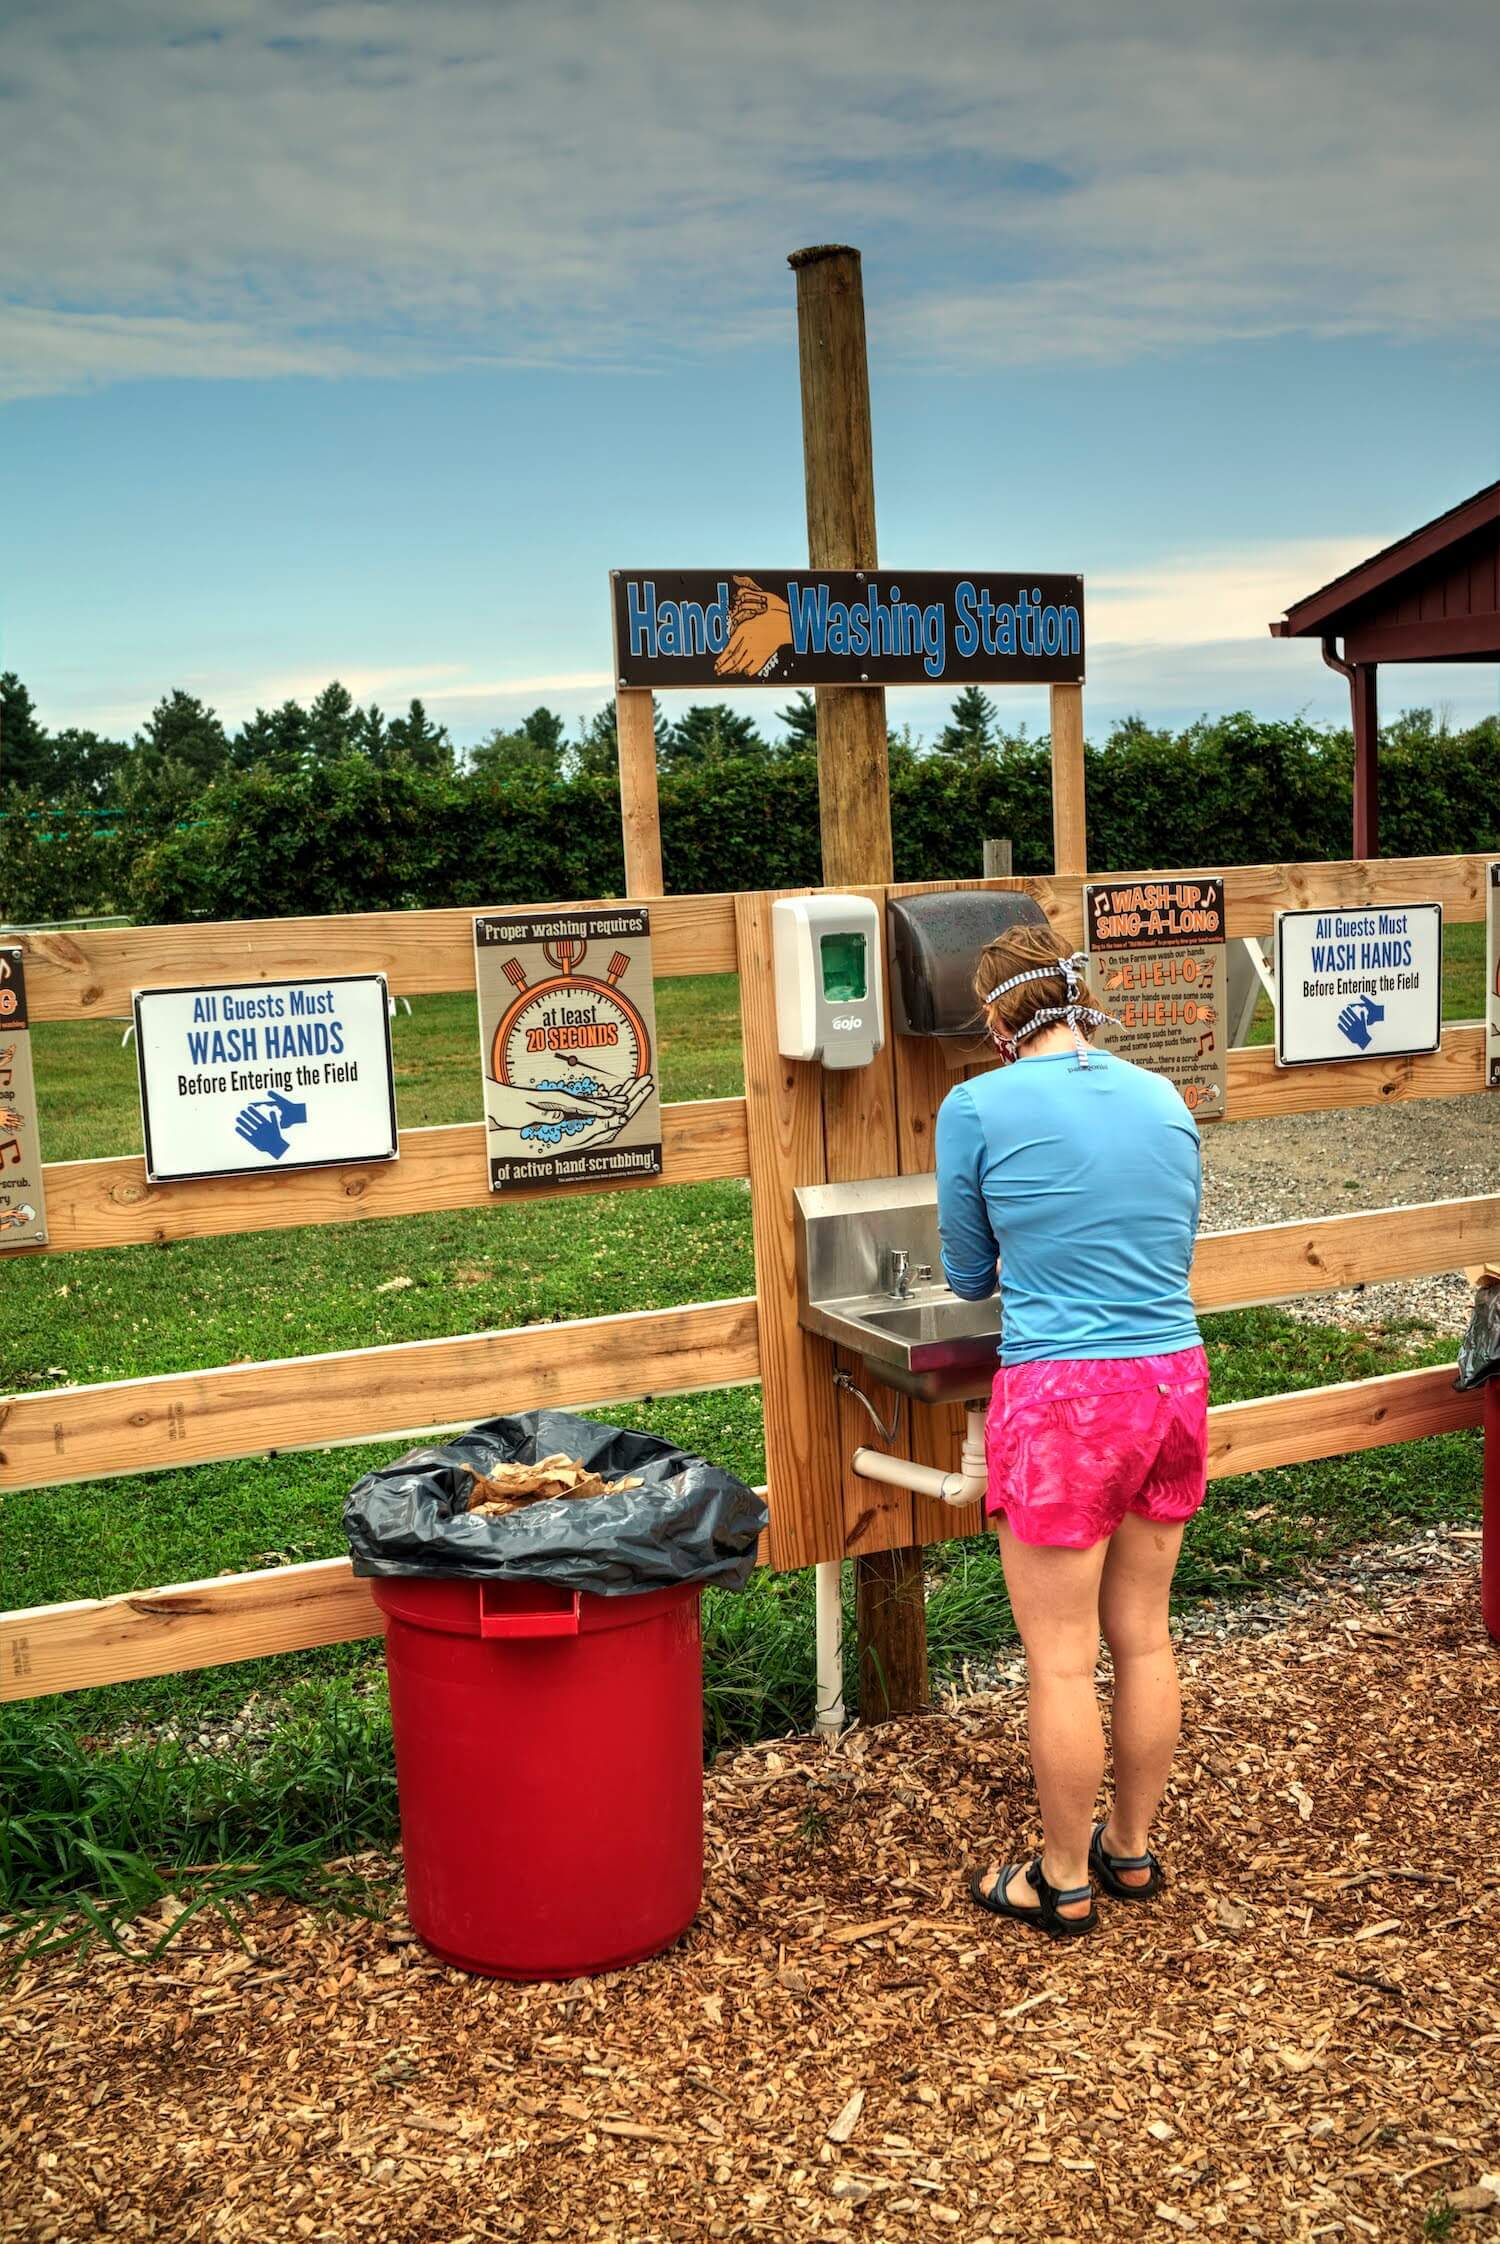 A Covid-19 handwash station at the Tougas Family Farm in Northborough, MA. September 2020